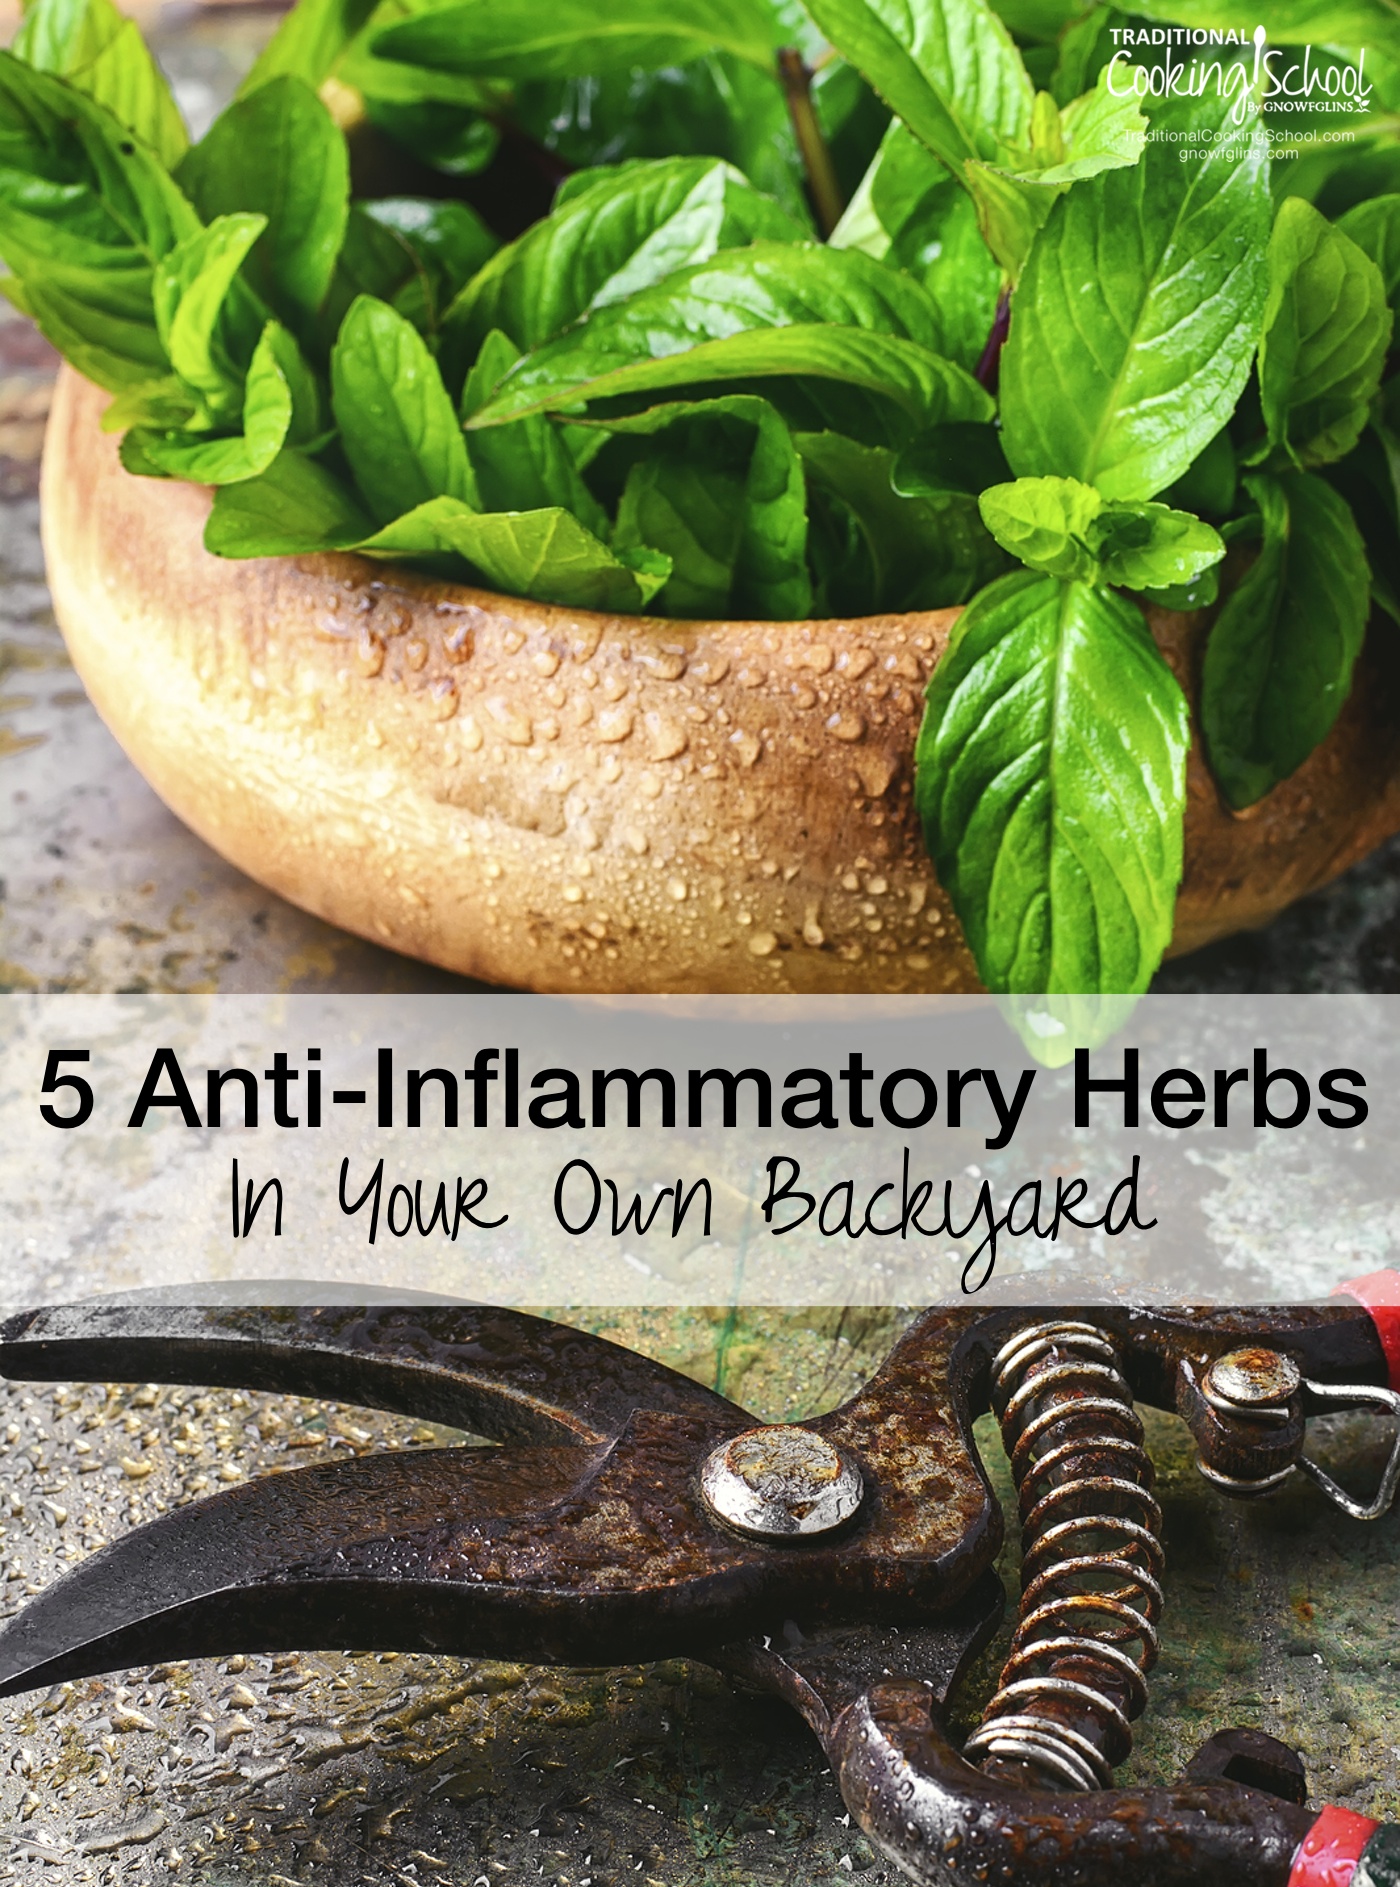 5 Anti-Inflammatory Herbs In Your Own Backyard | One of the reasons I love herbs so much is because of their ability to take care of every day symptoms. Here are 5 seemingly common plants that are anything but common when it comes to reducing inflammation and relieving swelling and pain. | TraditionalCookingSchool.com